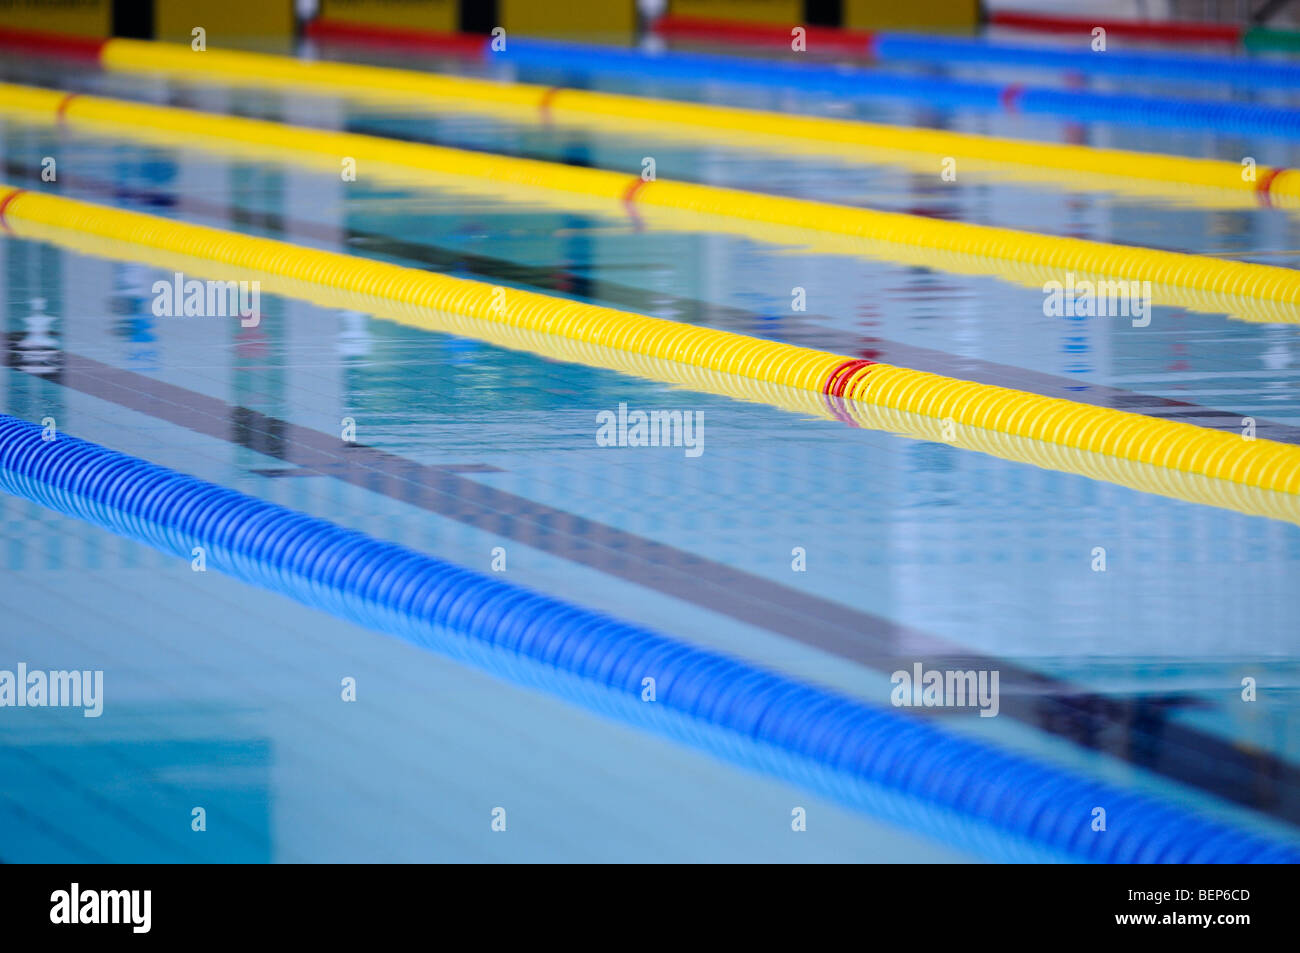 Swimming pool lanes marked with yellow and blue lane markers / floats Stock  Photo - Alamy